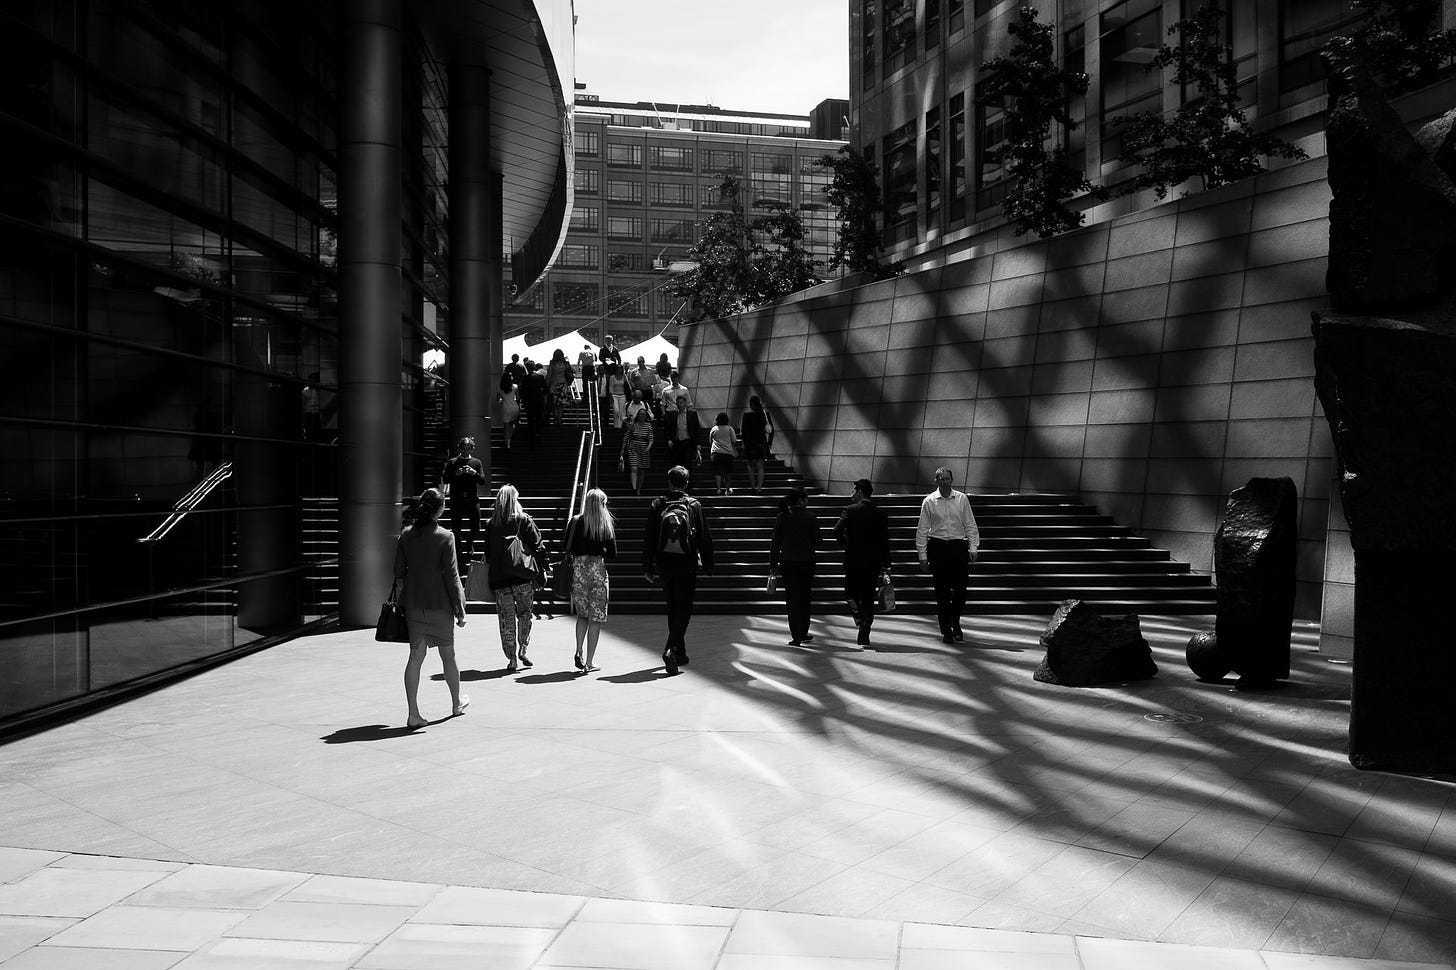 London, 2015. People walk past a building. On the wall across from the building there is a criss-cross shadow.